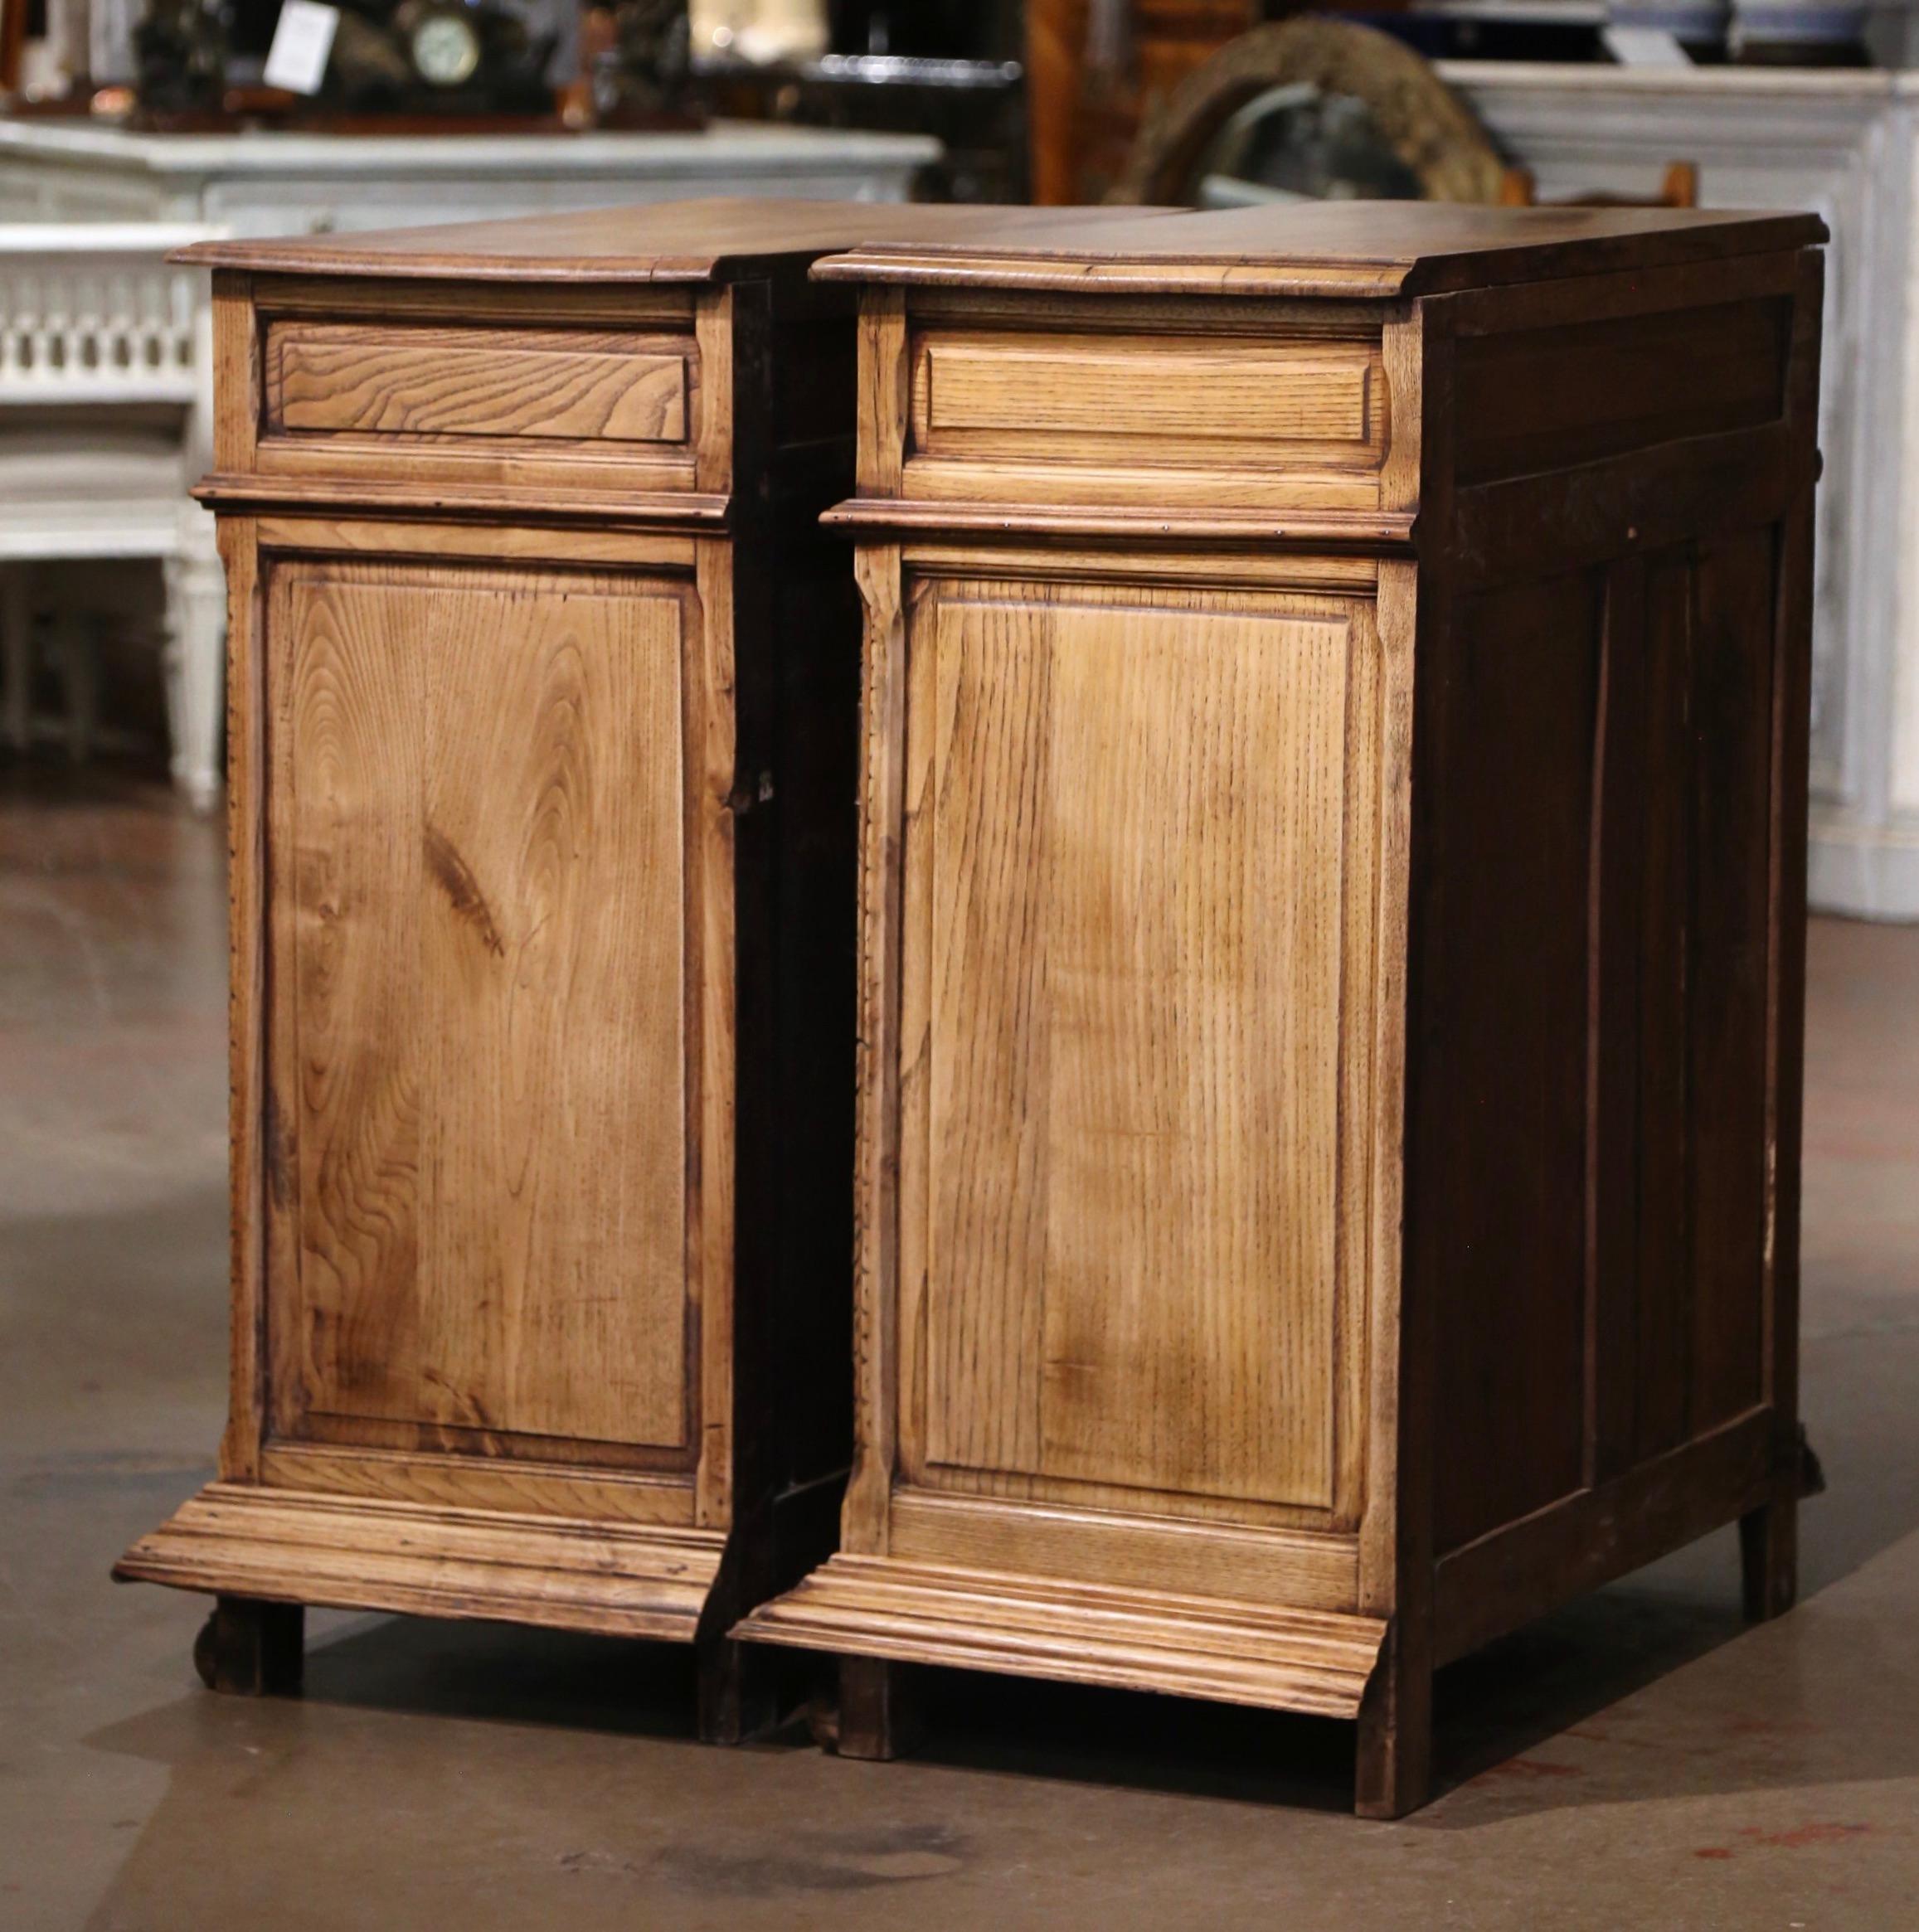  19th Century French Carved Bleached Oak Cabinets from Brittany, Set of Two For Sale 12